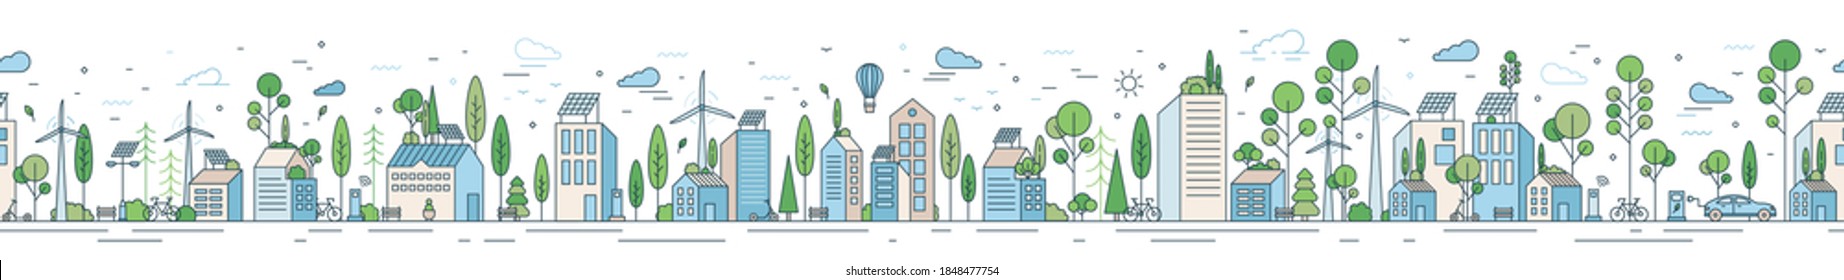 Vector horizontal line art illustration of eco cityscape with alternative energy. Seamless pattern with environmentally friendly city with roof greening, solar panels and windmills